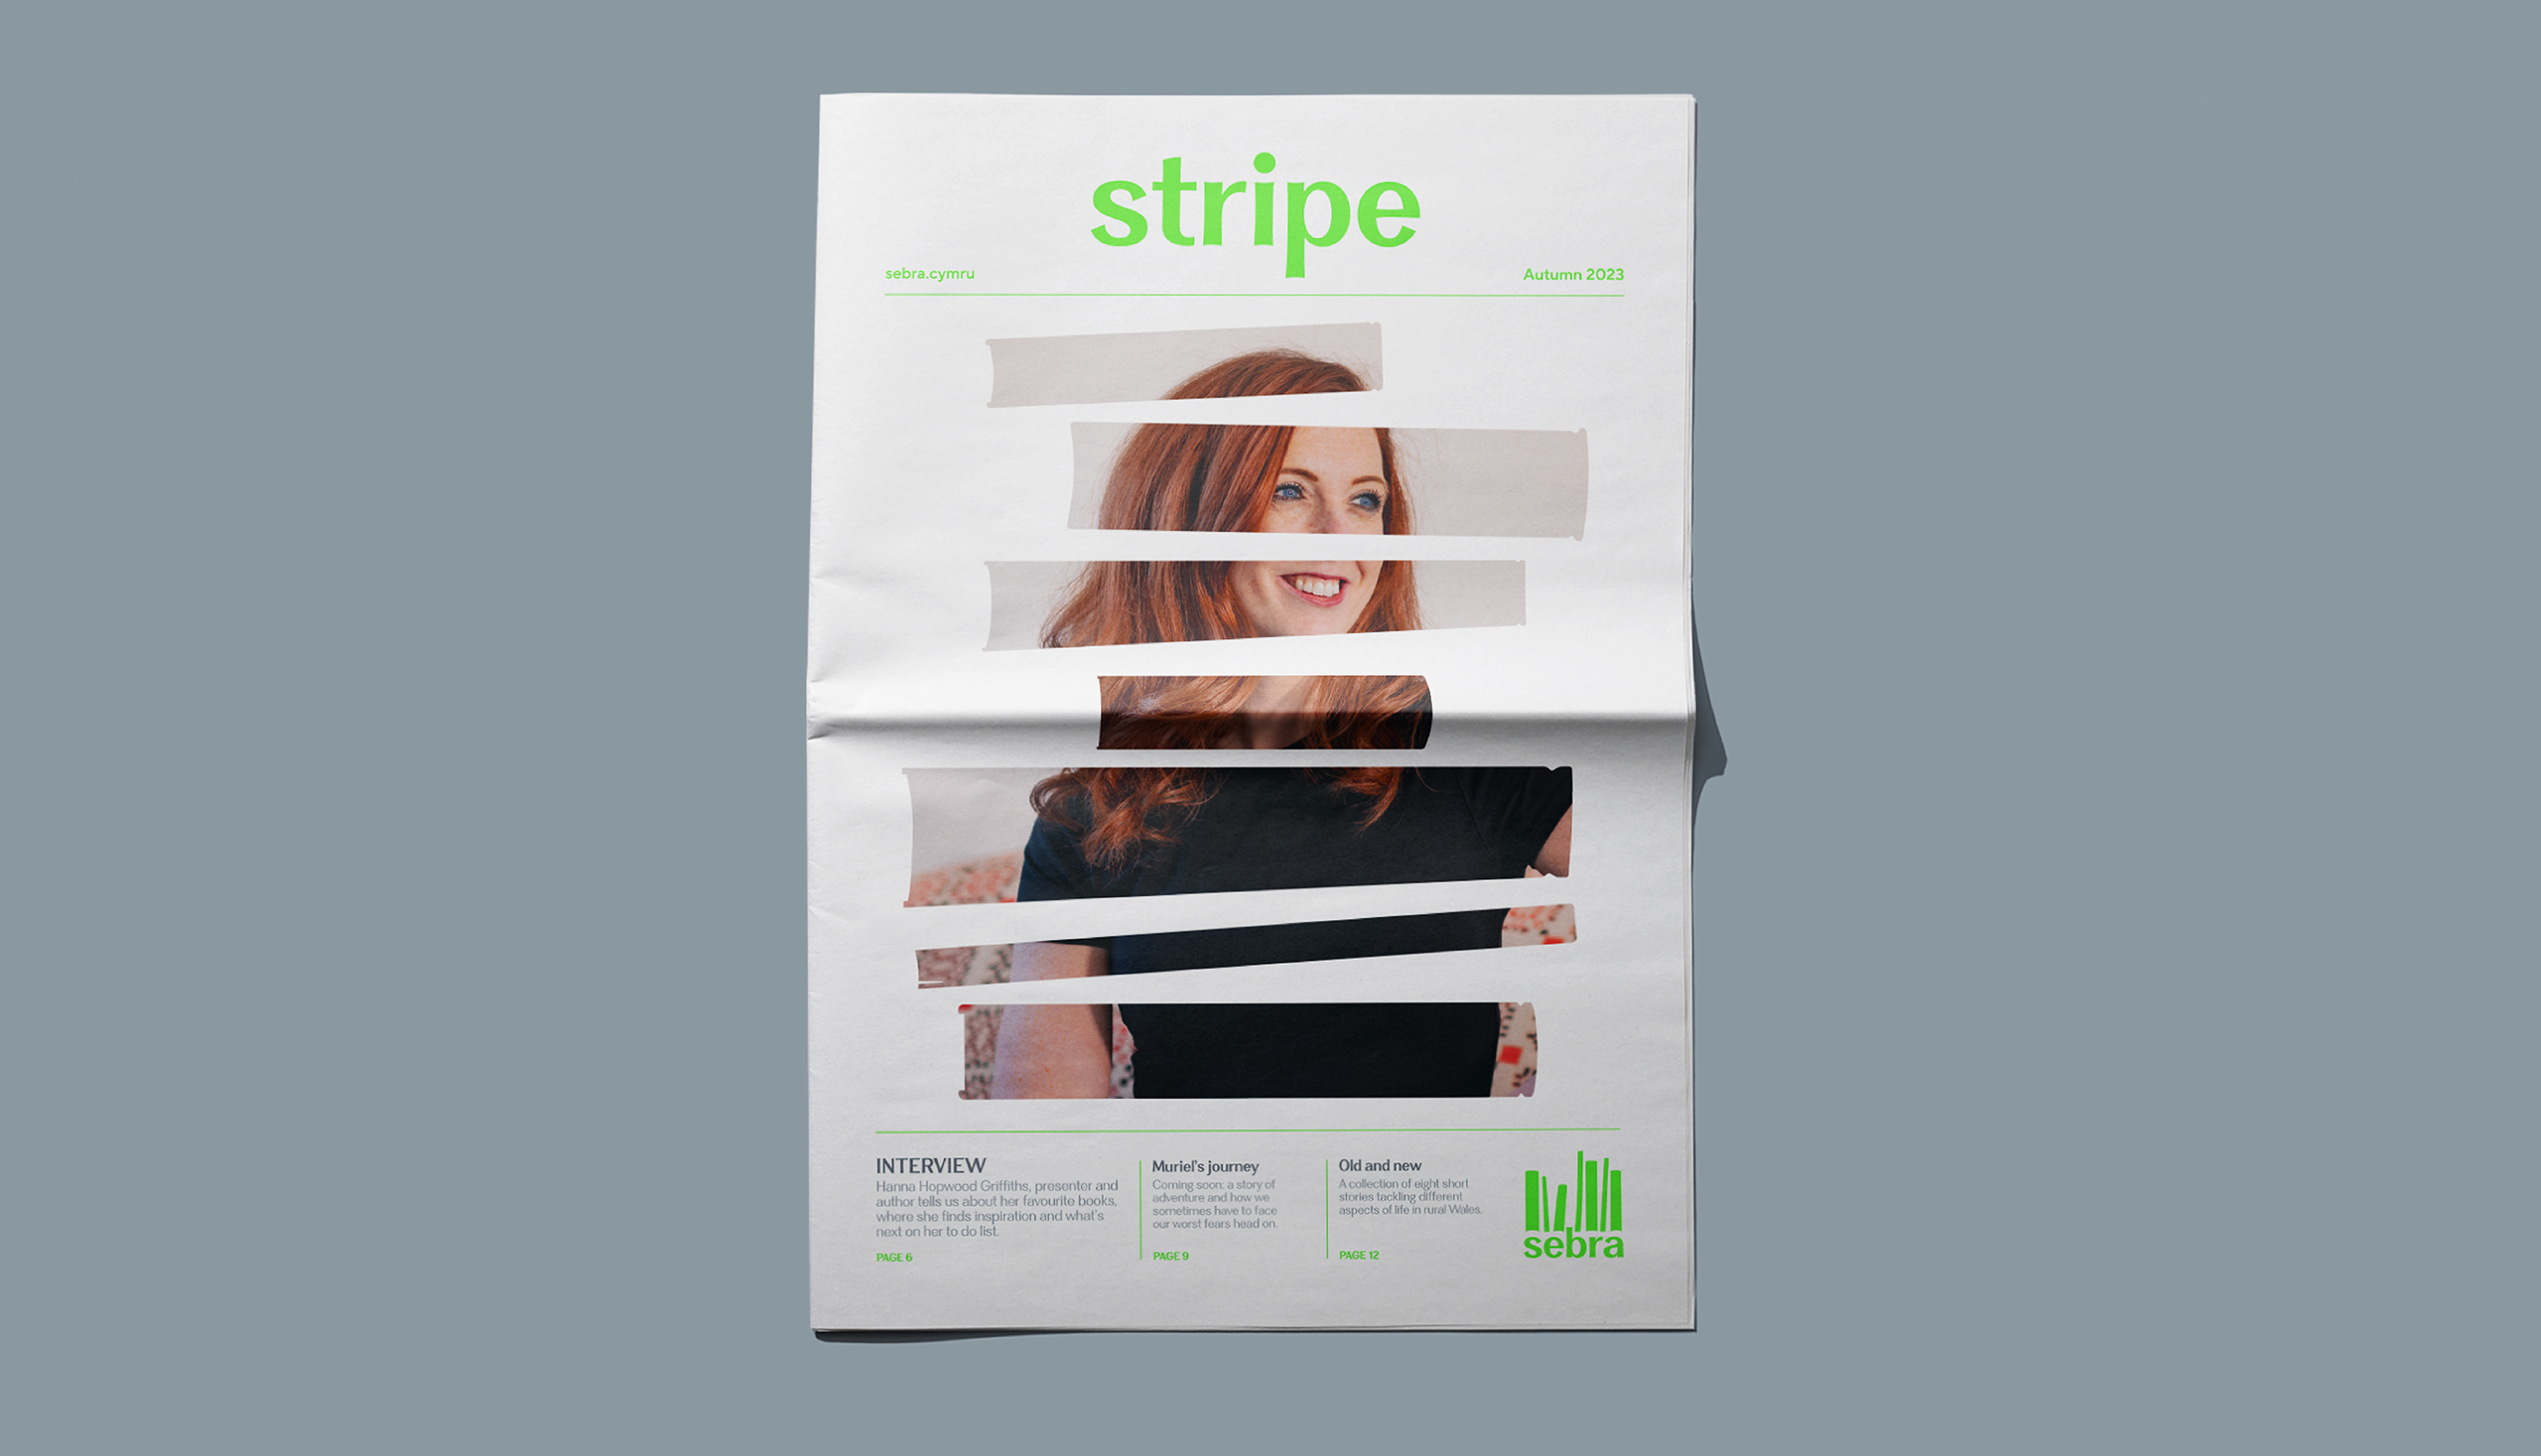 Branded editorial newspaper design that uses graphic book silhouettes as stripes. Inside stripes is a portrait of a woman